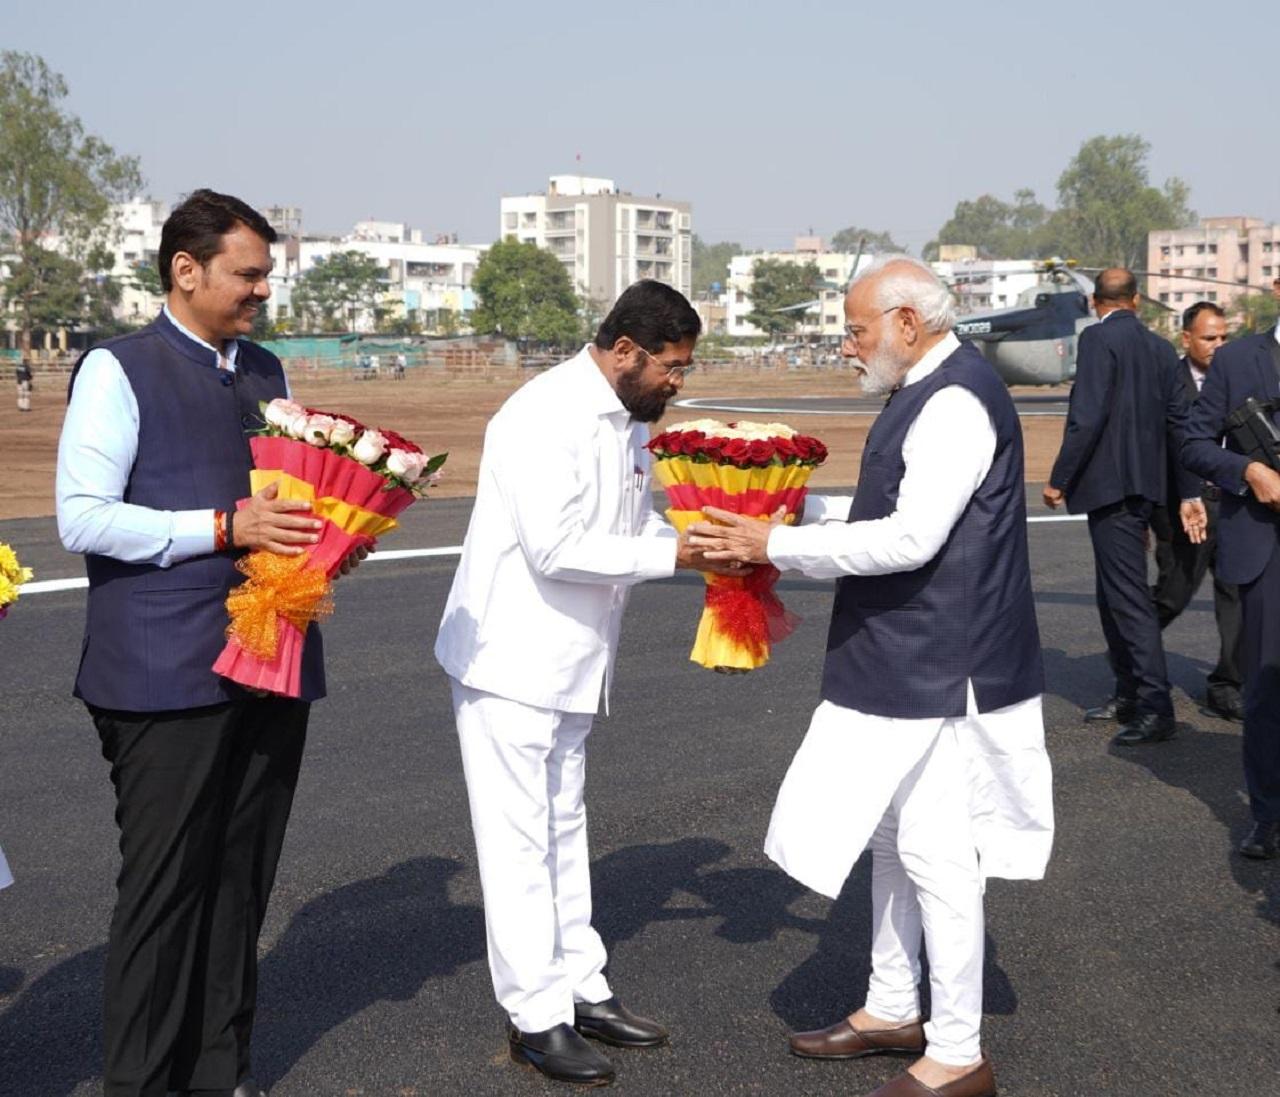 PM Modi is on a daylong visit to Maharashtra, where he will inaugurate the 27th National Youth Festival in Nashik and later launch development projects worth over Rs 30,000 crore in the state